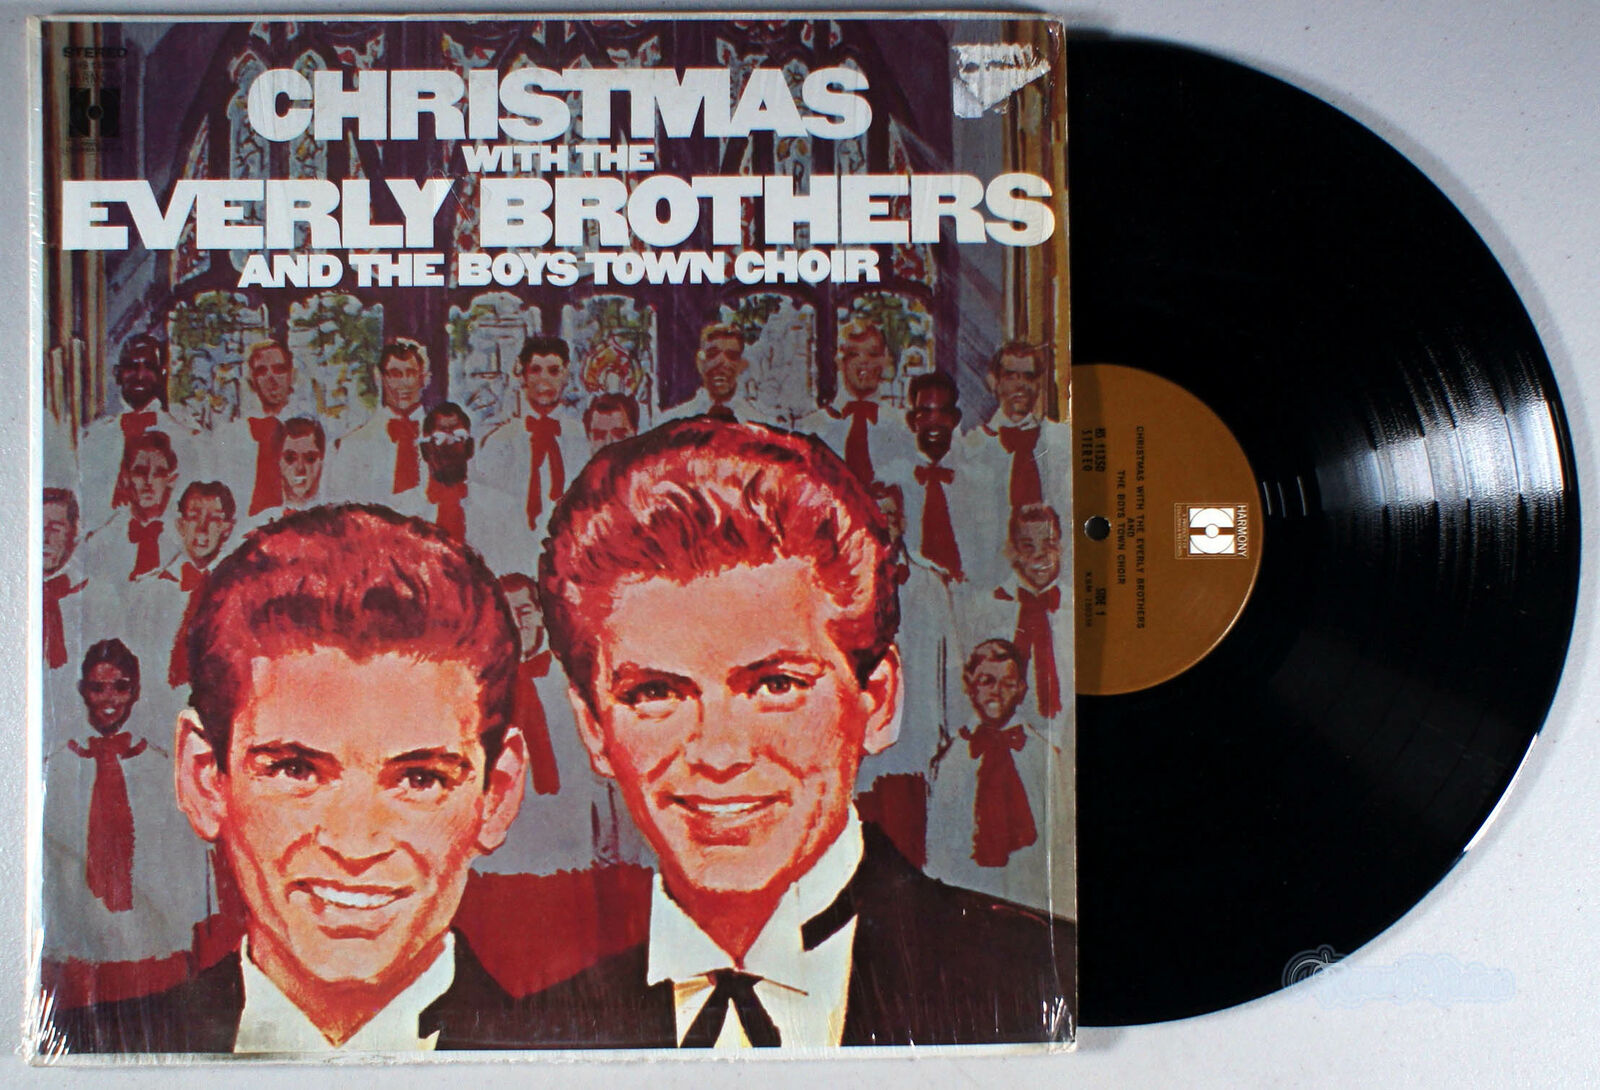 Everly Brothers - Christmas with the (1969) Vinyl LP • Holiday, Boys Town Choir